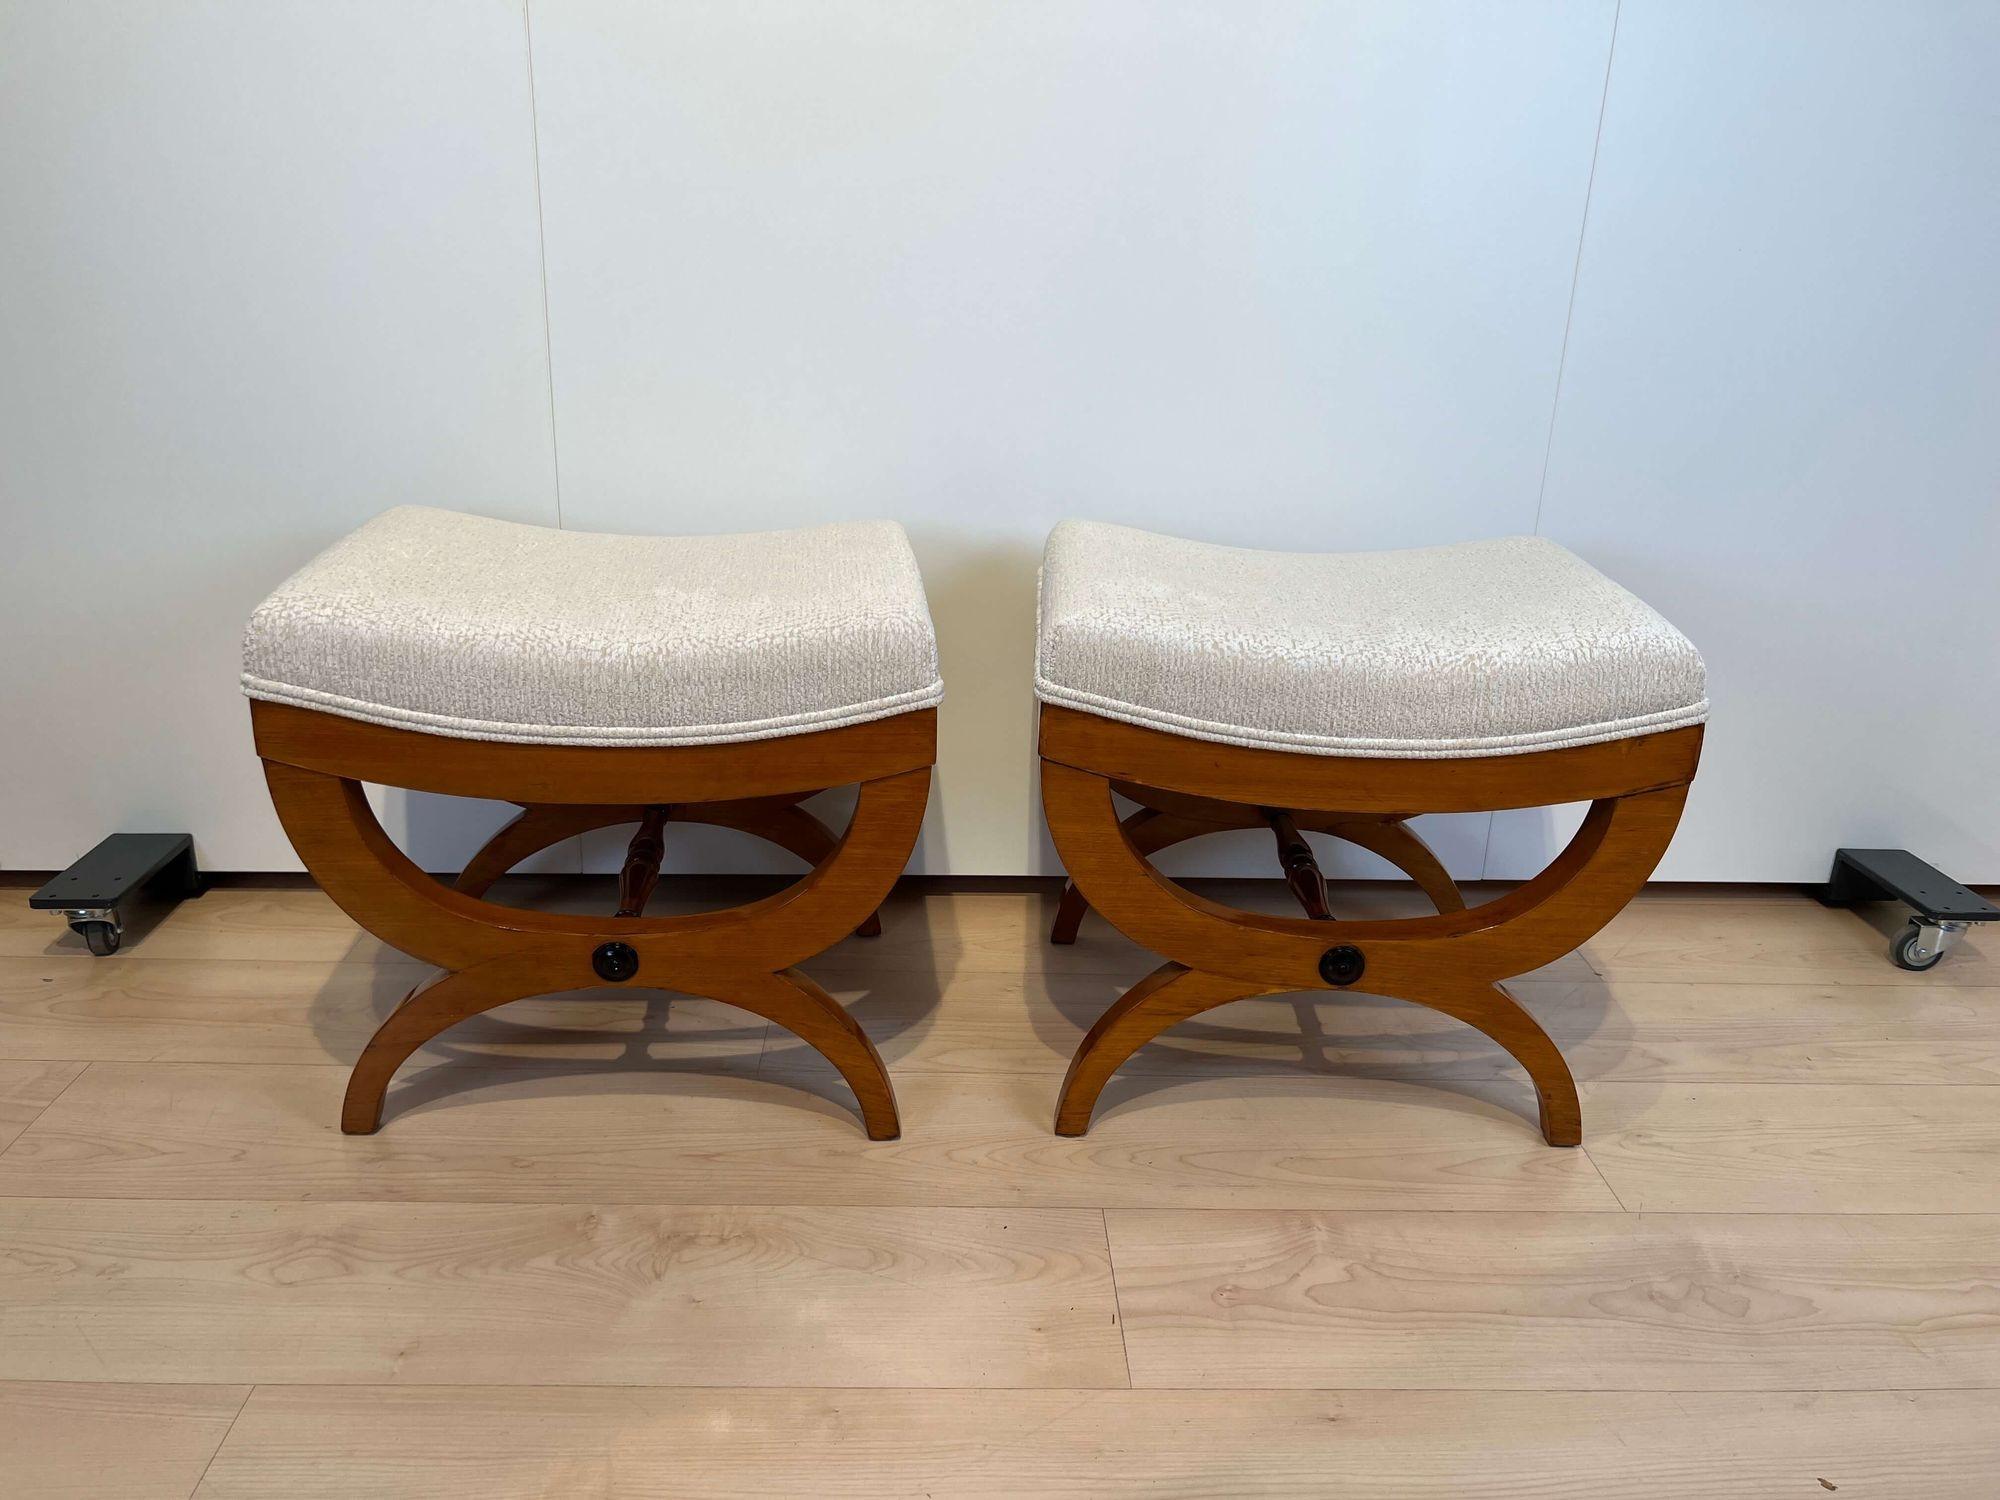 Polished Pair of Large Tabourets, Beech Wood, France, circa 1860 For Sale